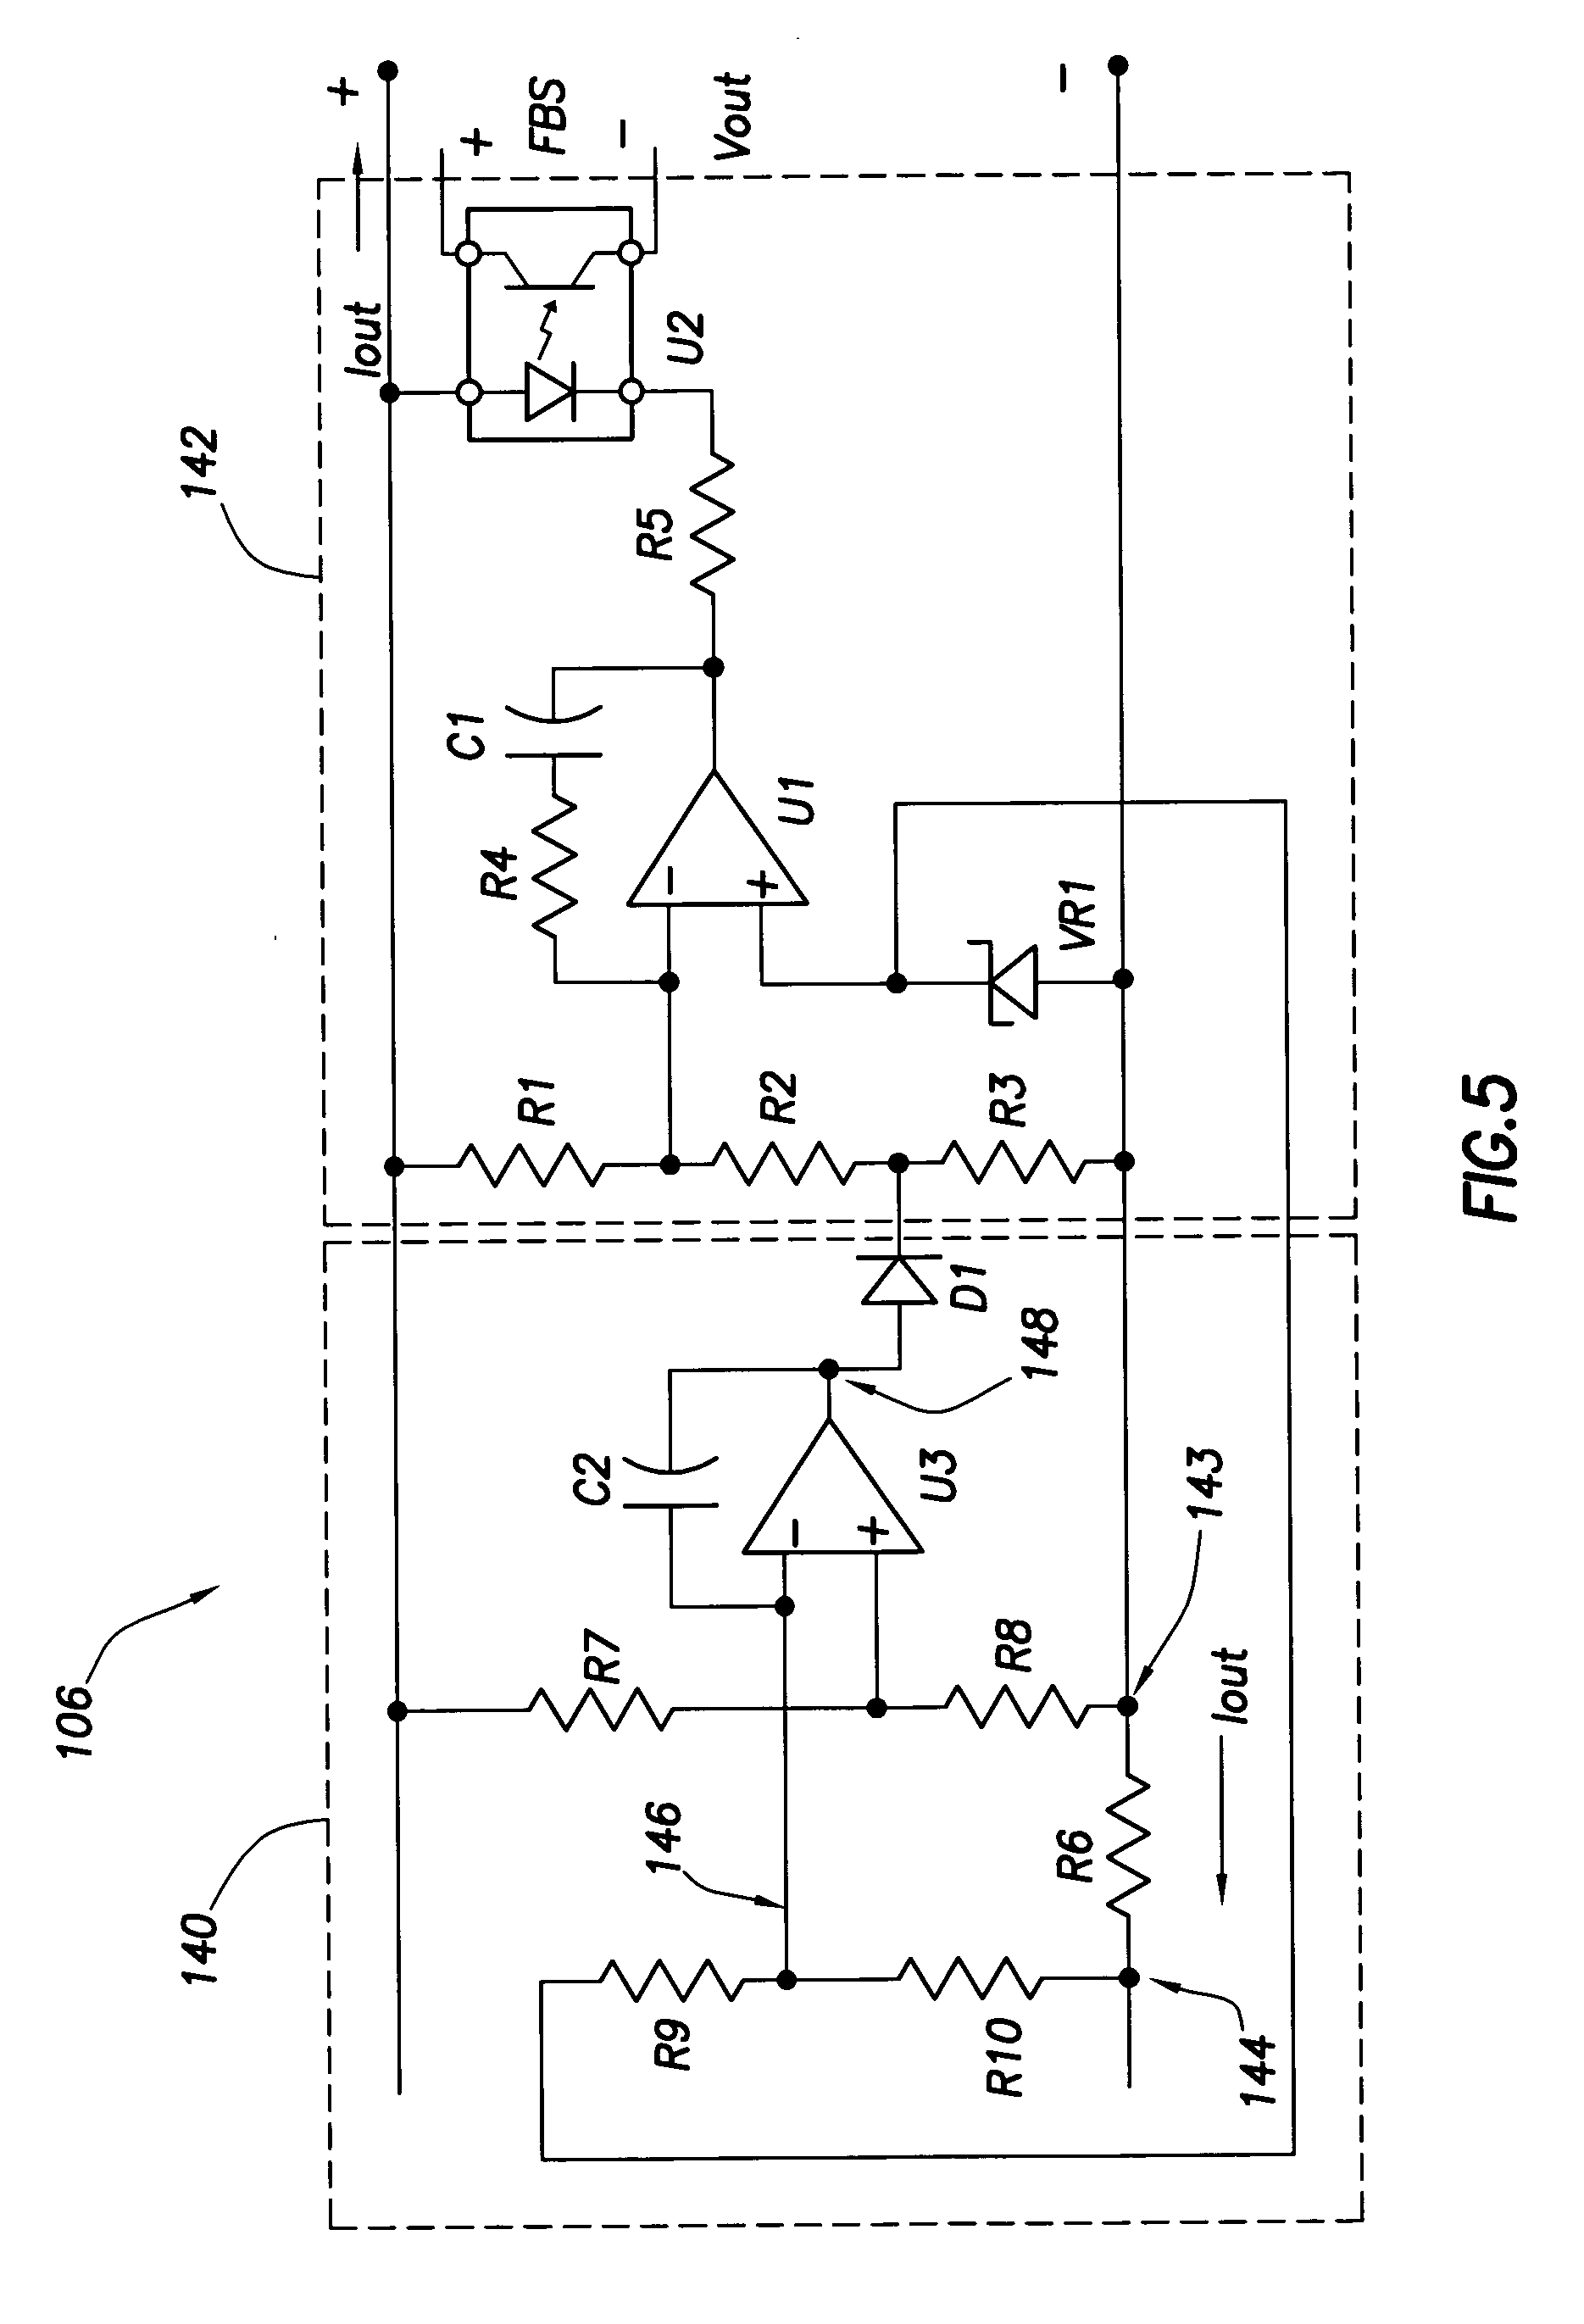 Technique for conveying overload conditions from an AC adapter to a load powered by the adapter